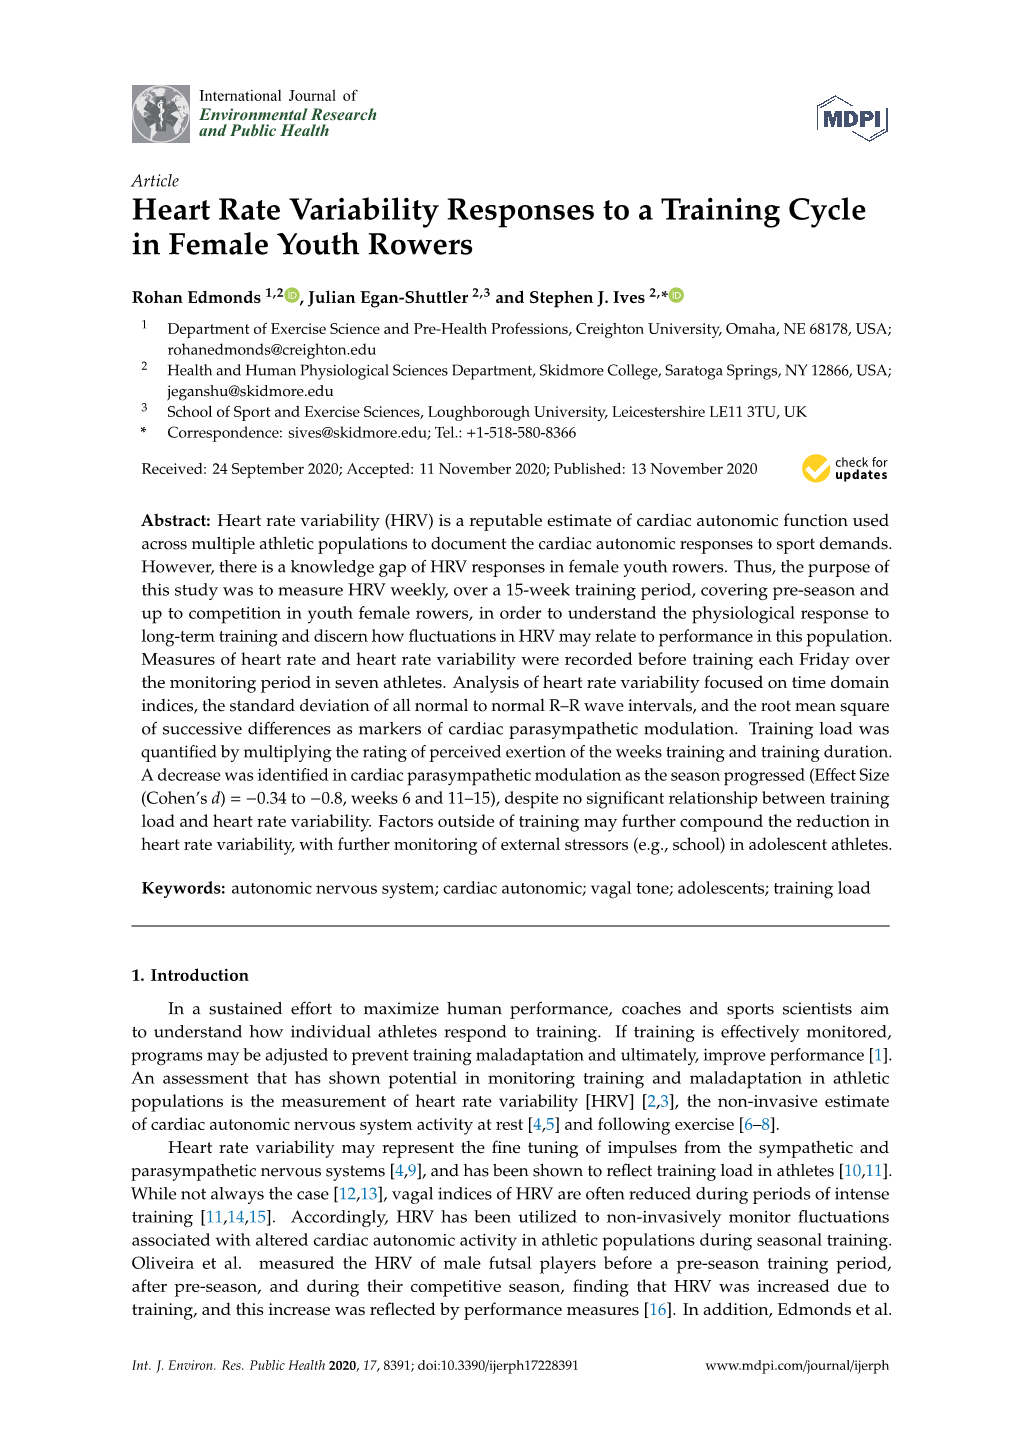 Heart Rate Variability Responses to a Training Cycle in Female Youth Rowers